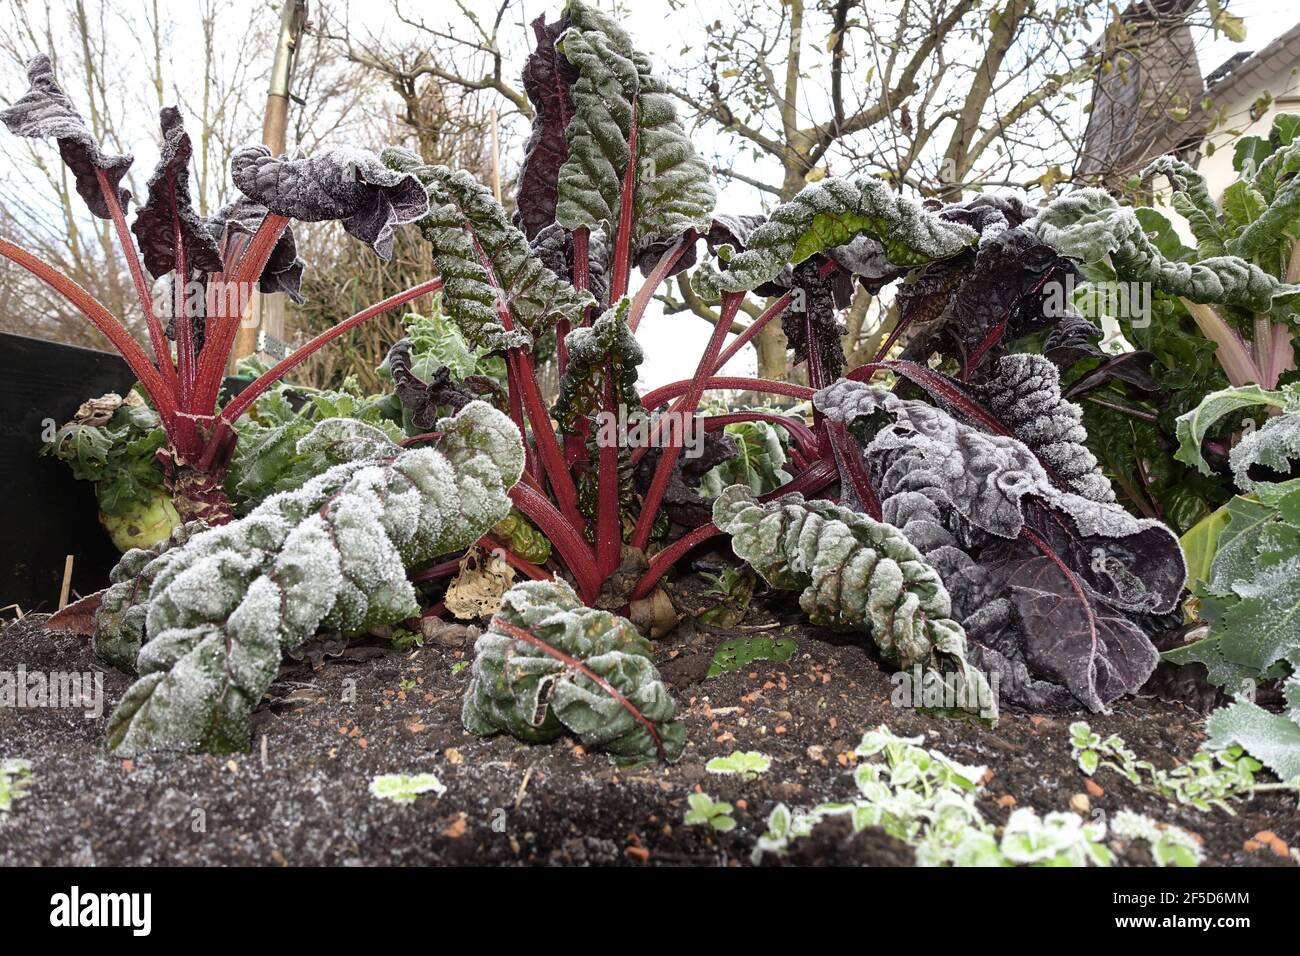 Foliage Beet, Chard, Swiss chard, Mangel (Beta vulgaris var. cicla, Beta vulgaris ssp. vulagris var. cicla), Chard with red stems in a raised bed Stock Photo